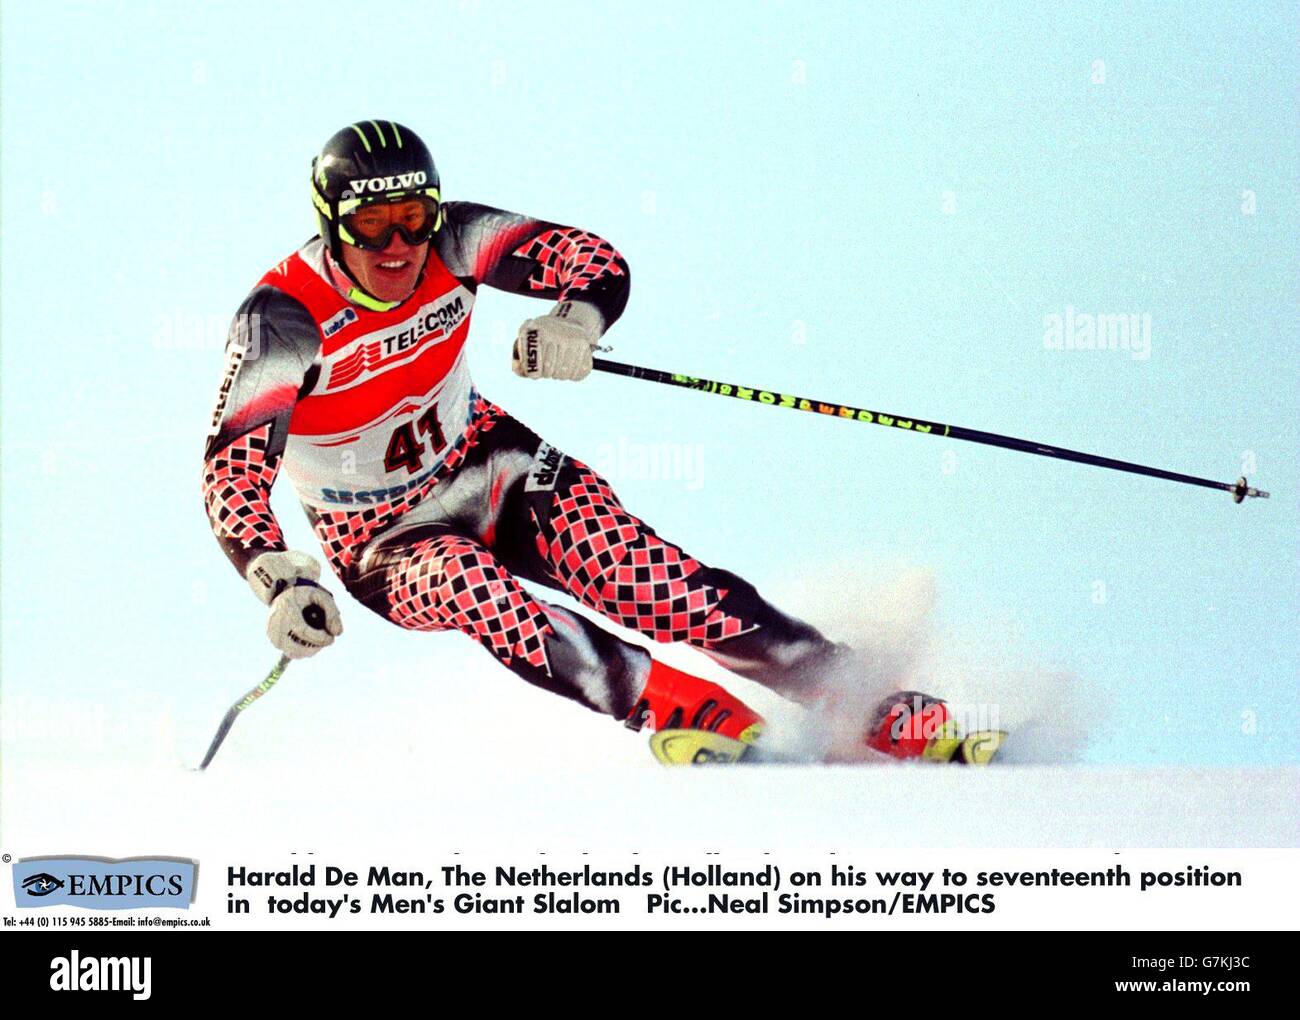 Harald De Man, The Netherlands (Holland) on his way to seventeenth position in today's Men's Giant Slalom Stock Photo